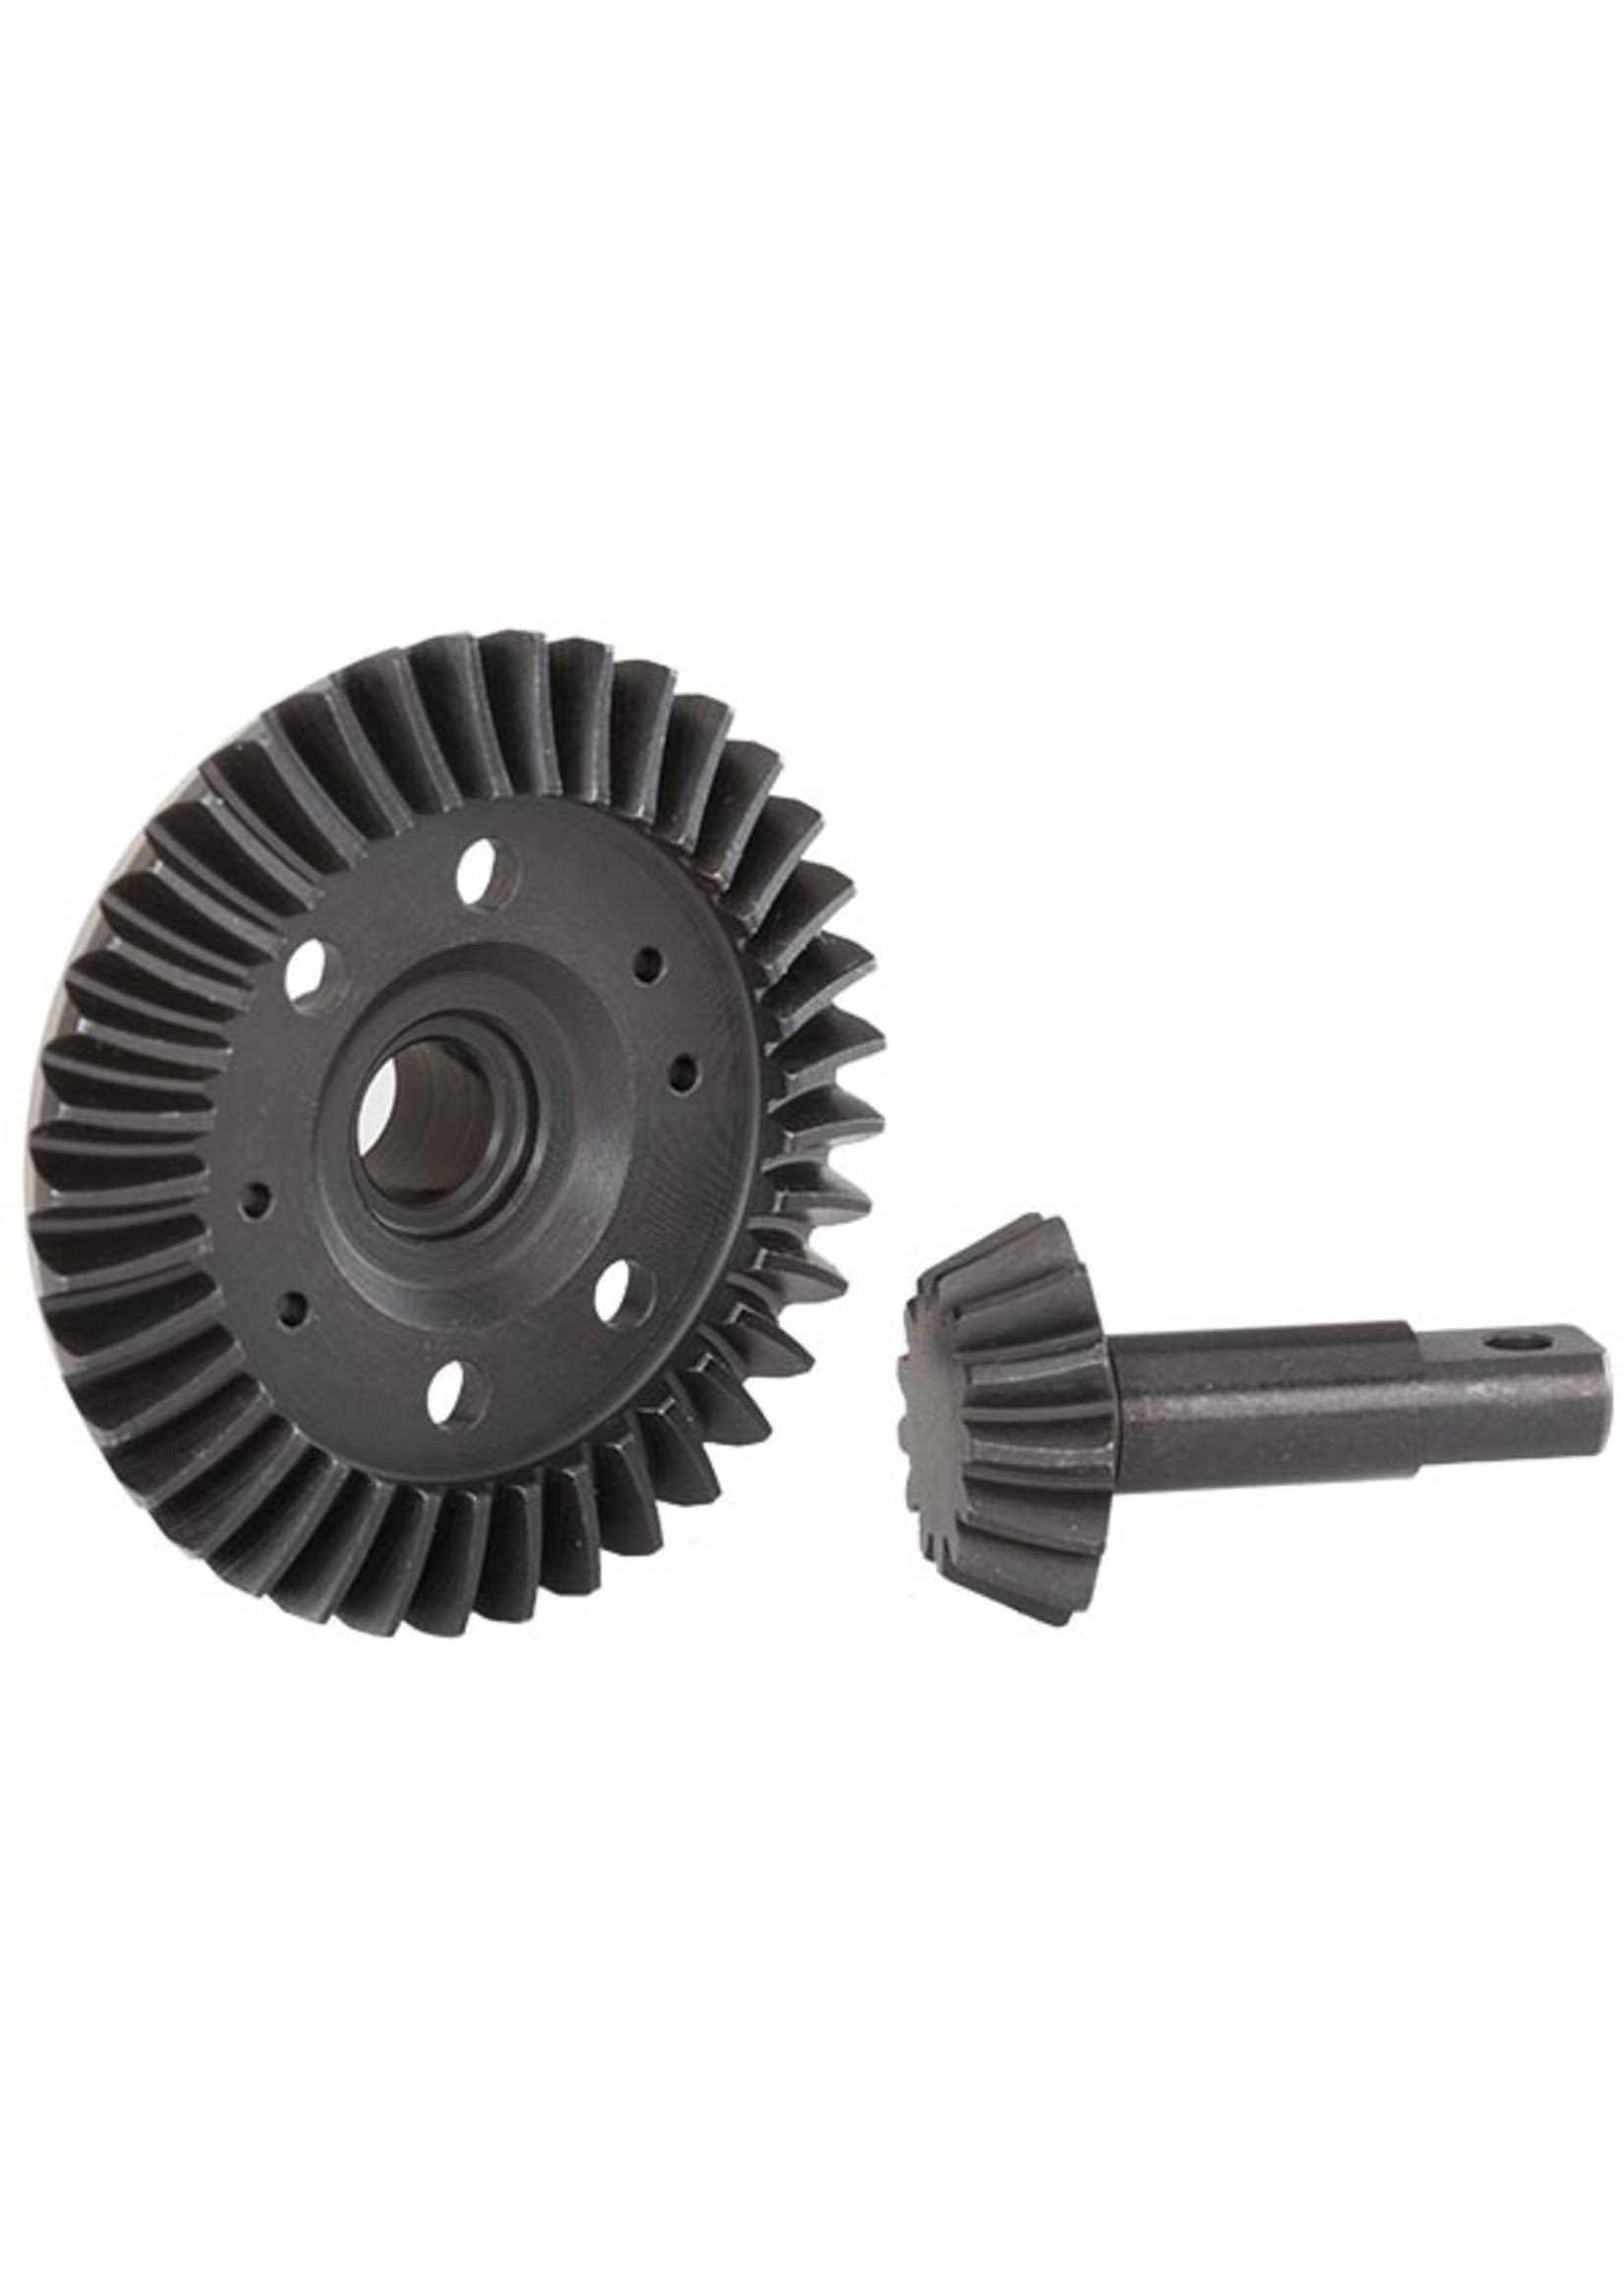 Traxxas 5379R - Front Ring GEAR, Differential Pinion GEAR, Machined Spiral Cut